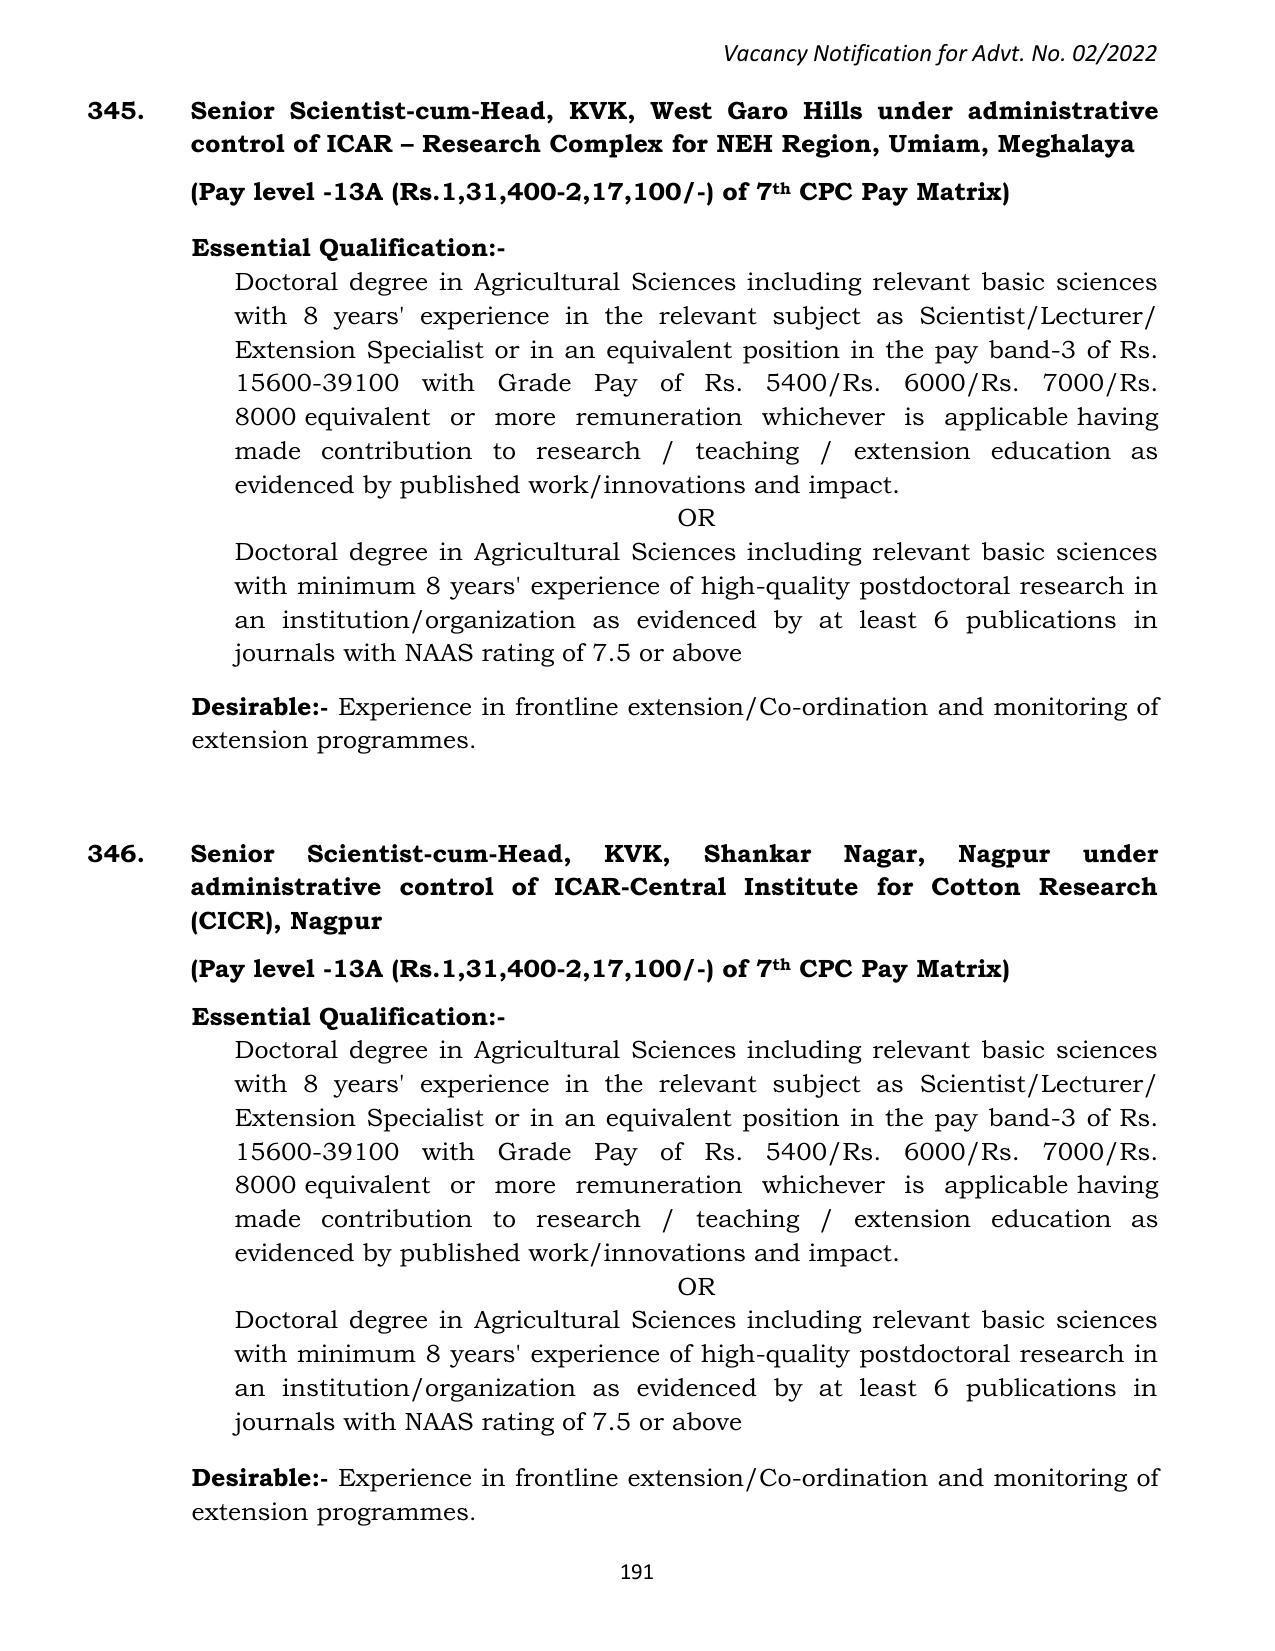 ASRB Non-Research Management Recruitment 2022 - Page 102